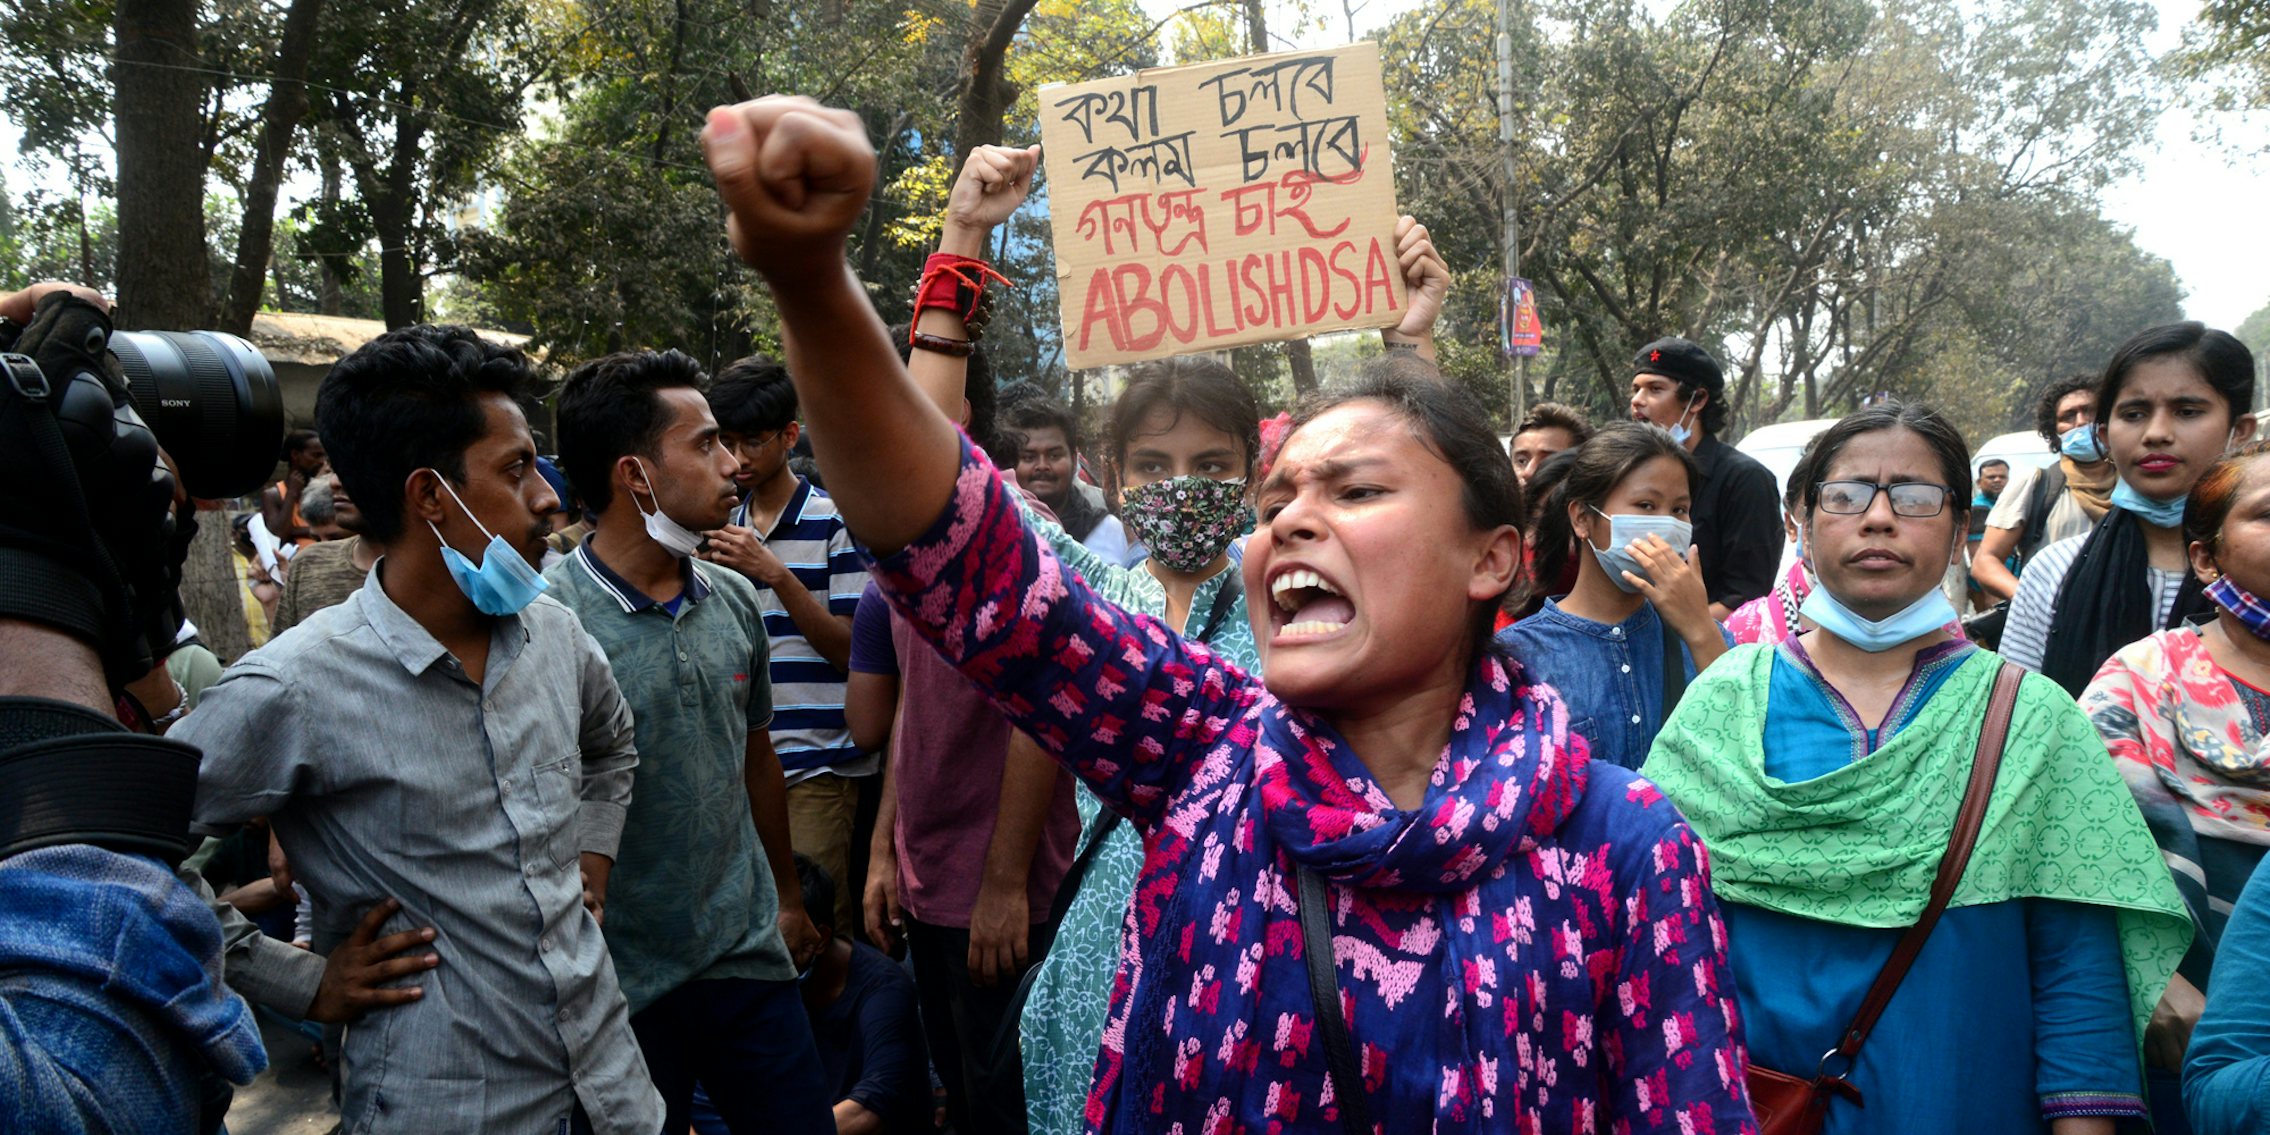 students demonstrating protest in front of the Home Ministry in Dhaka, Bangladesh on March 01, 2021